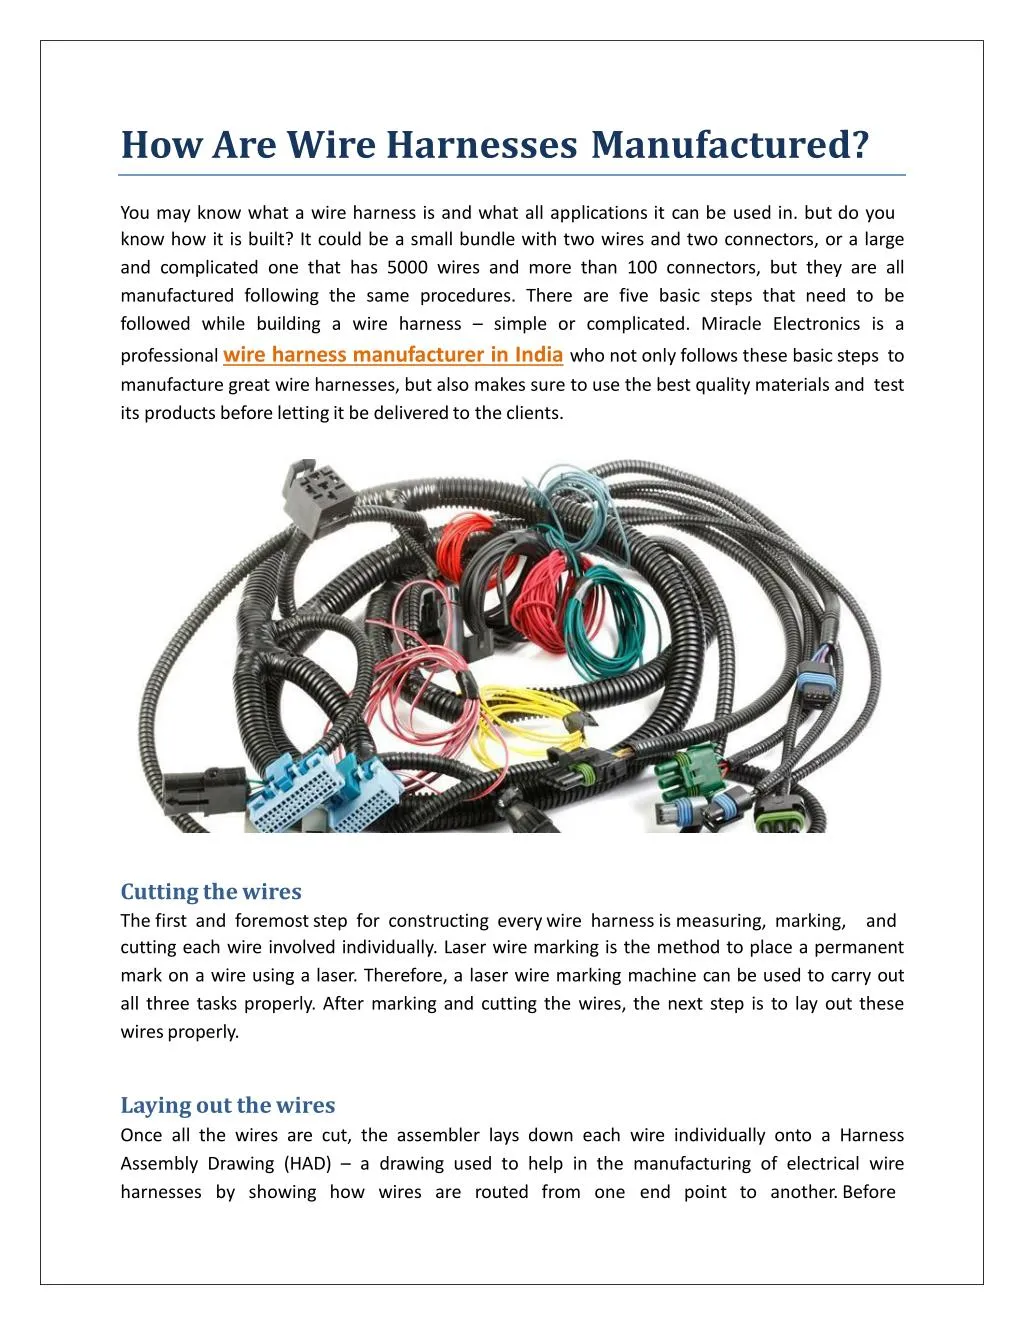 how are wire harnesses manufactured